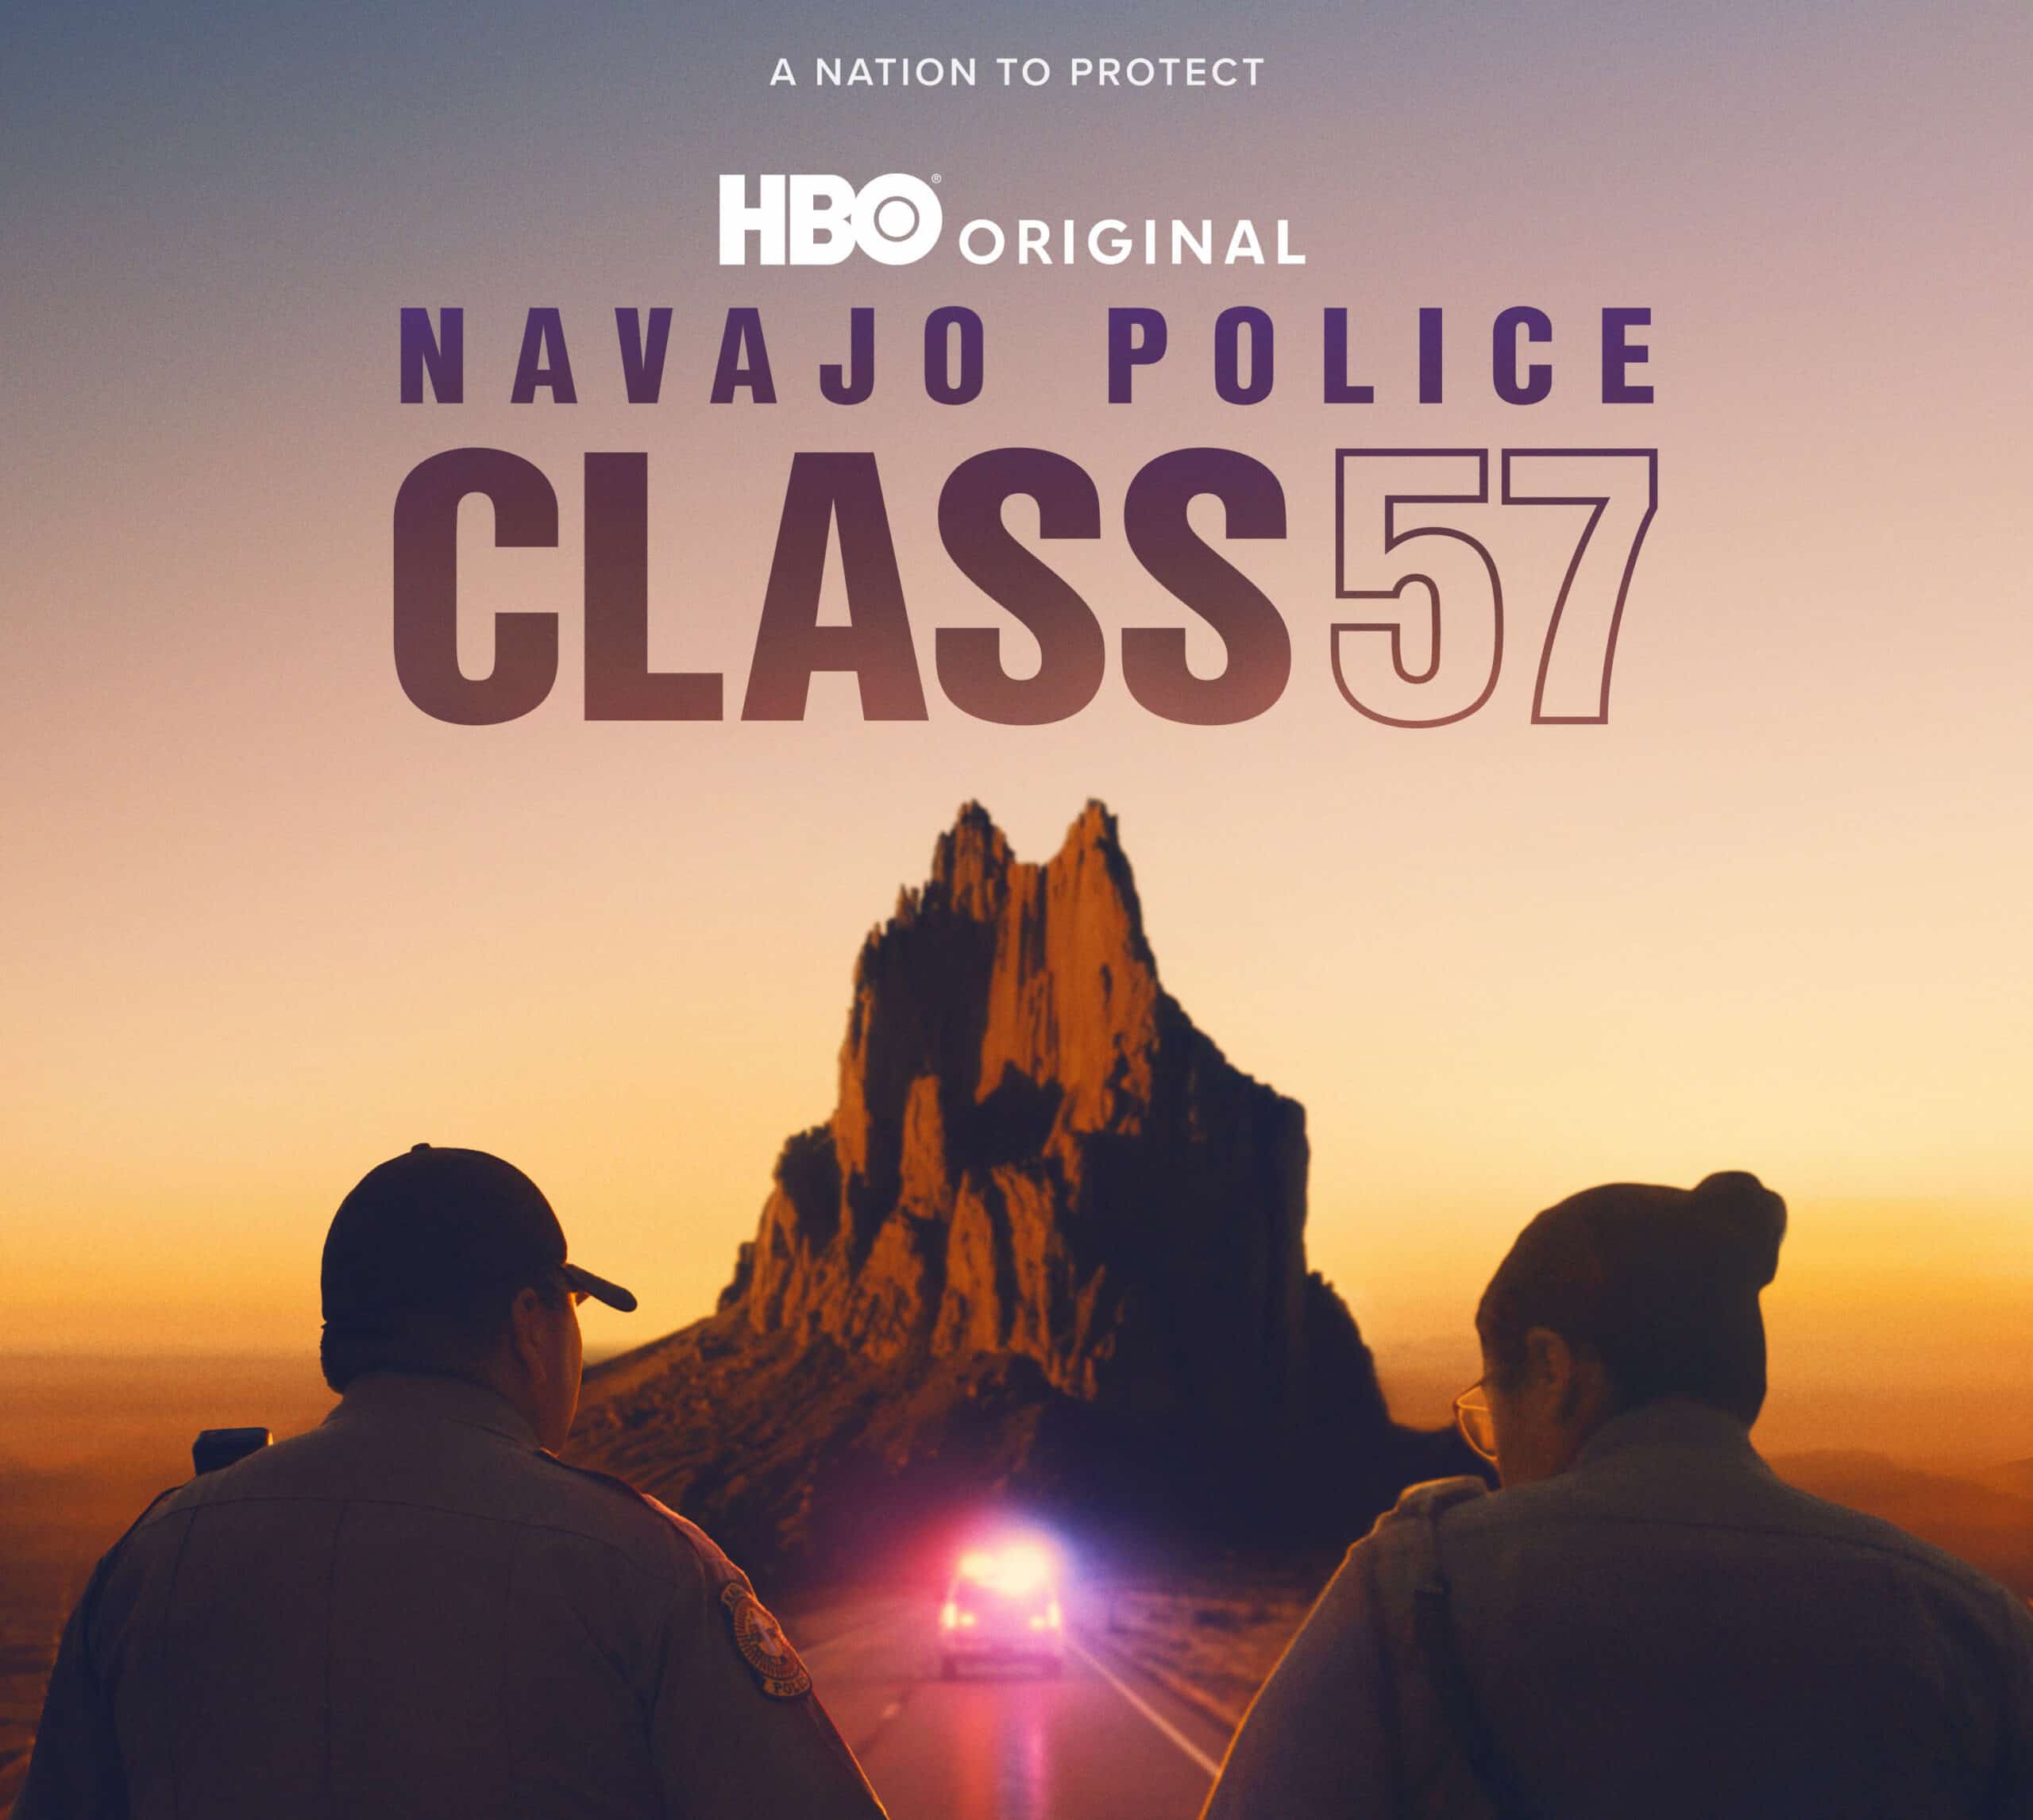 Behind the Scenes with Navajo Police: Class 57 Creator and IAIA Faculty Kahlil Hudson